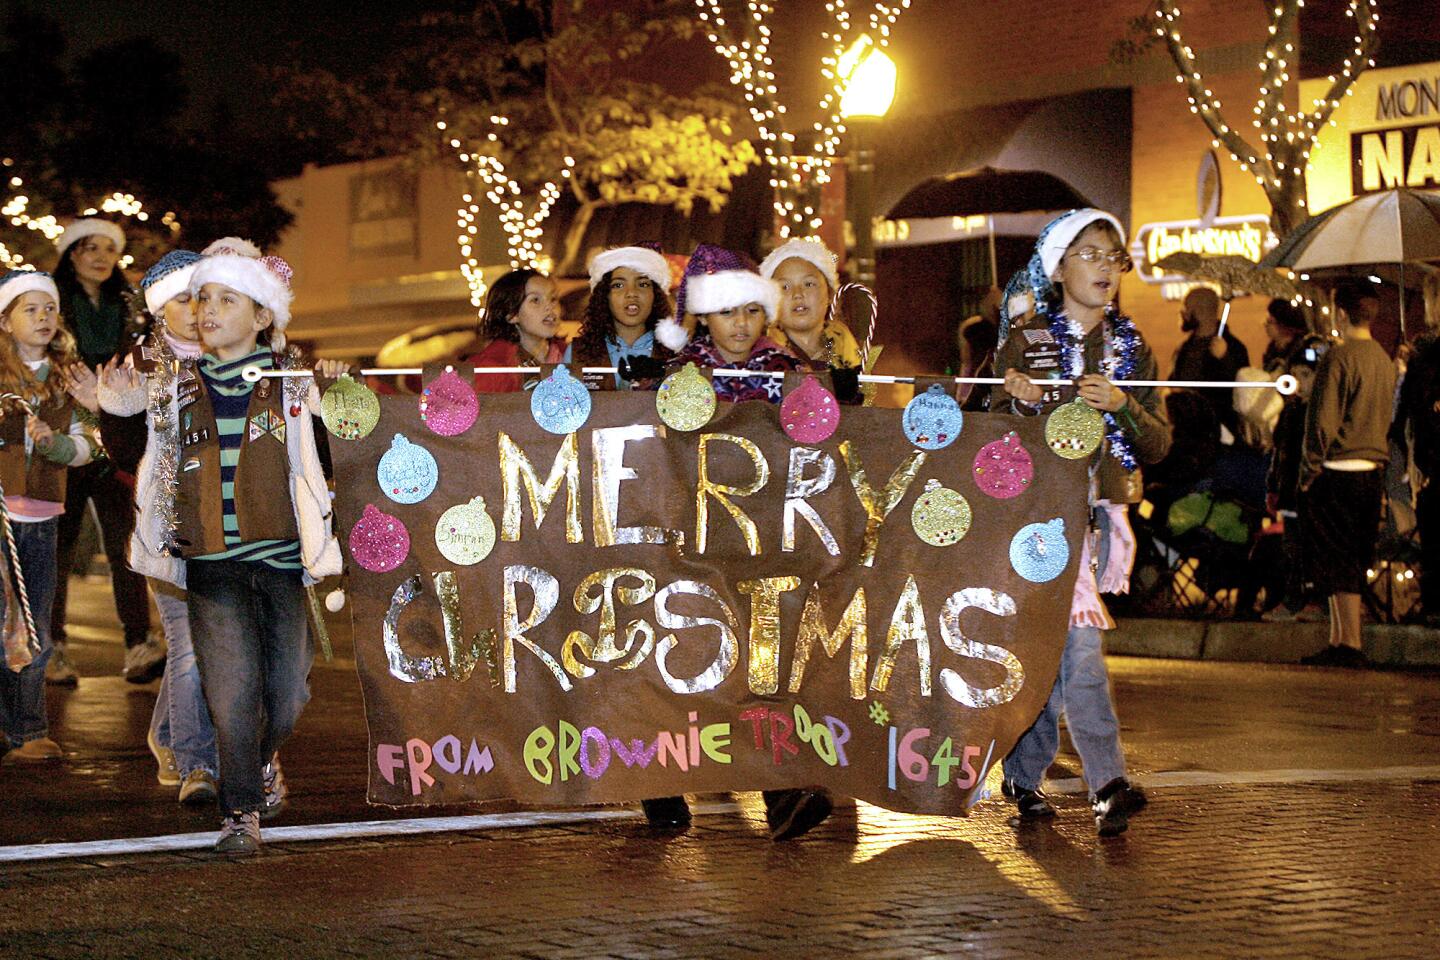 Members of a local Brownie Troop wave to the crowds during the annual Montrose Christmas Parade in Montrose on Saturday, December 1, 2012.